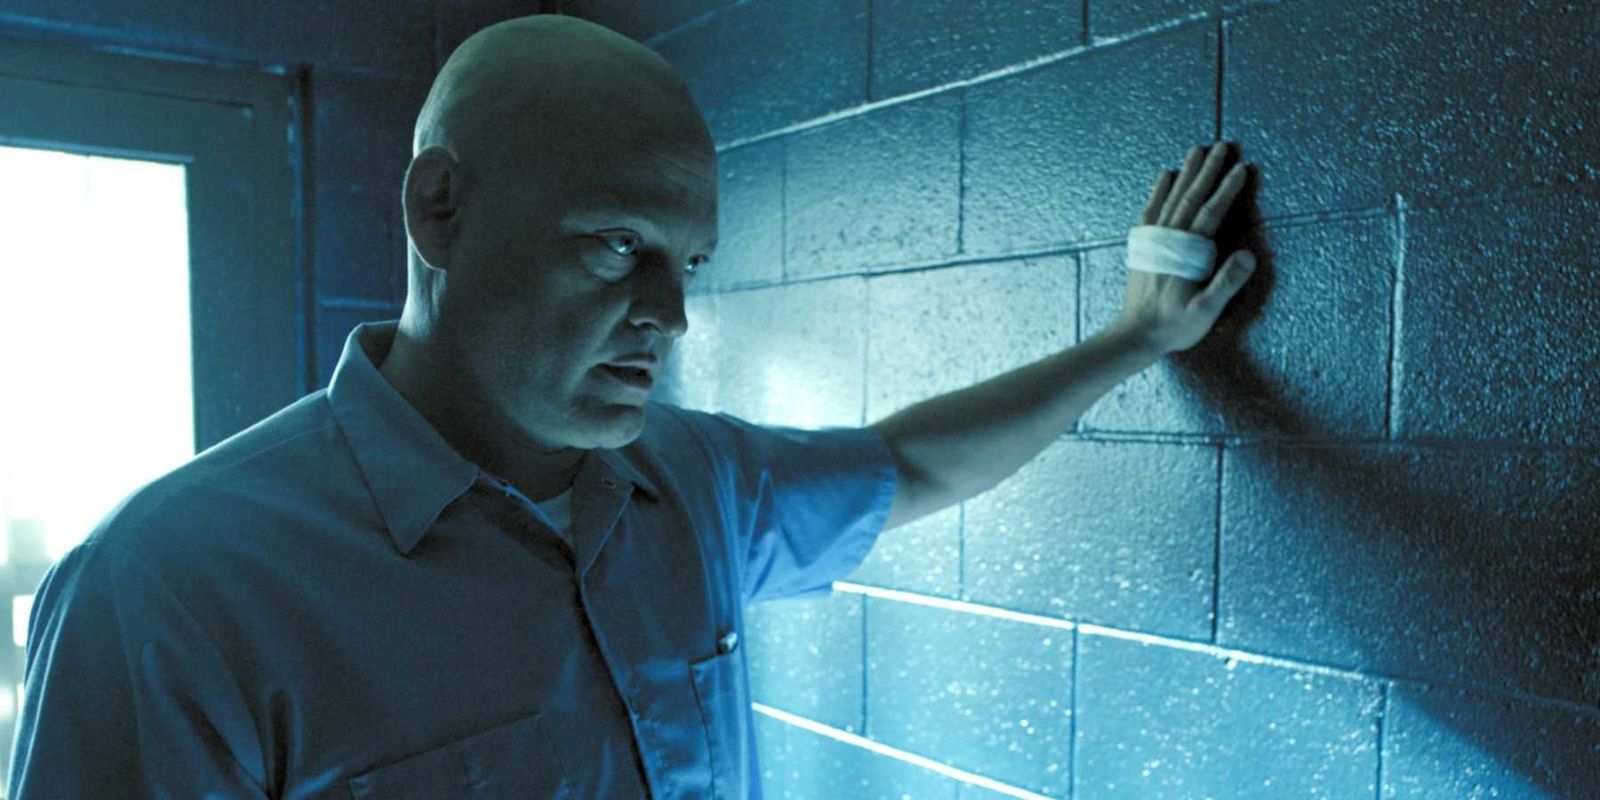 Brawl In Cell Block 99 Ending Explained It’s Dante’s Inferno